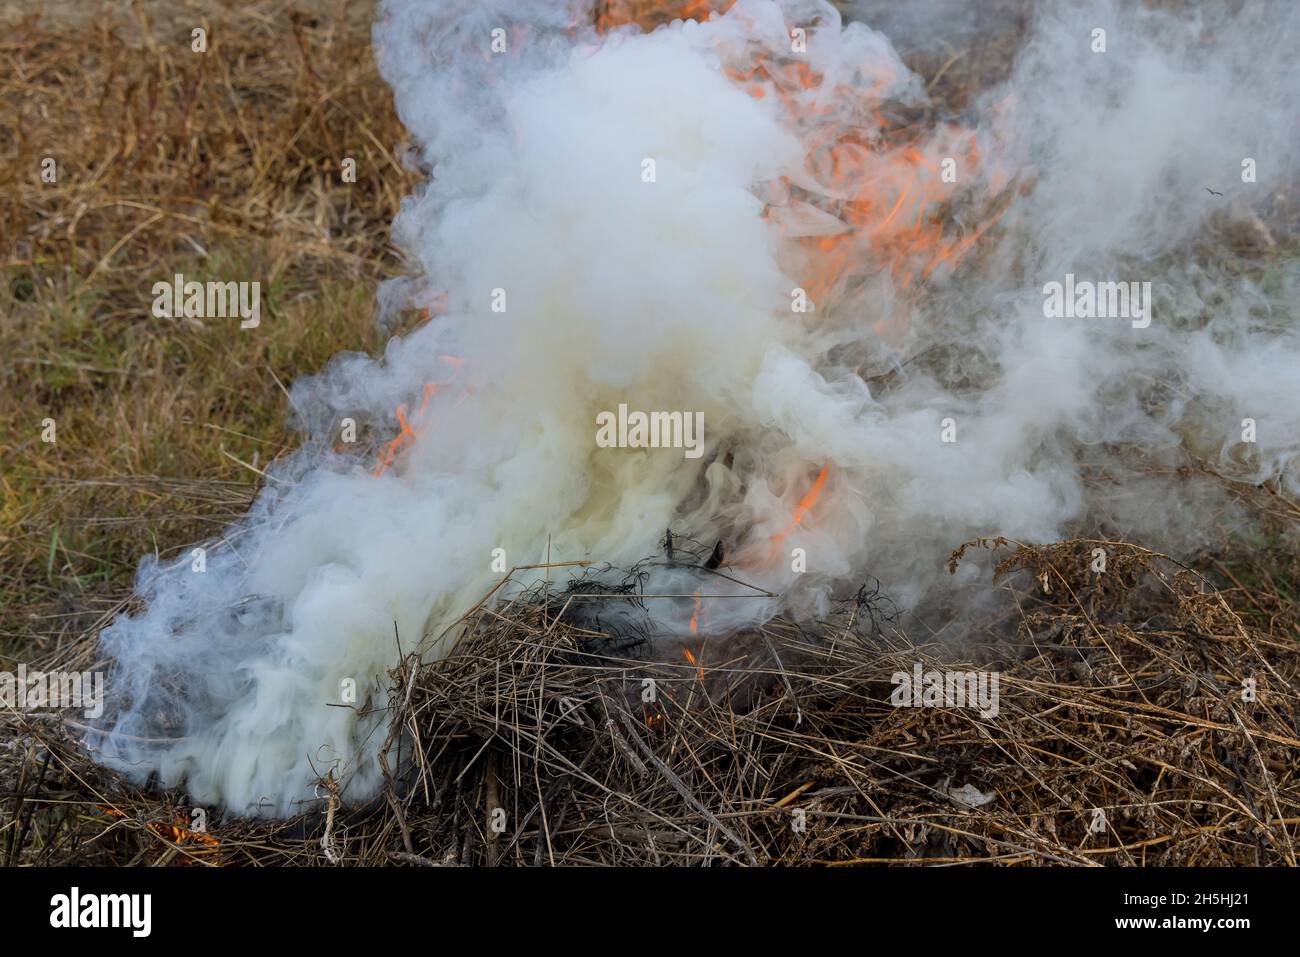 Smoke rise from fire of fallen leaves, grass and garden refuse during autumn cleaning period Stock Photo